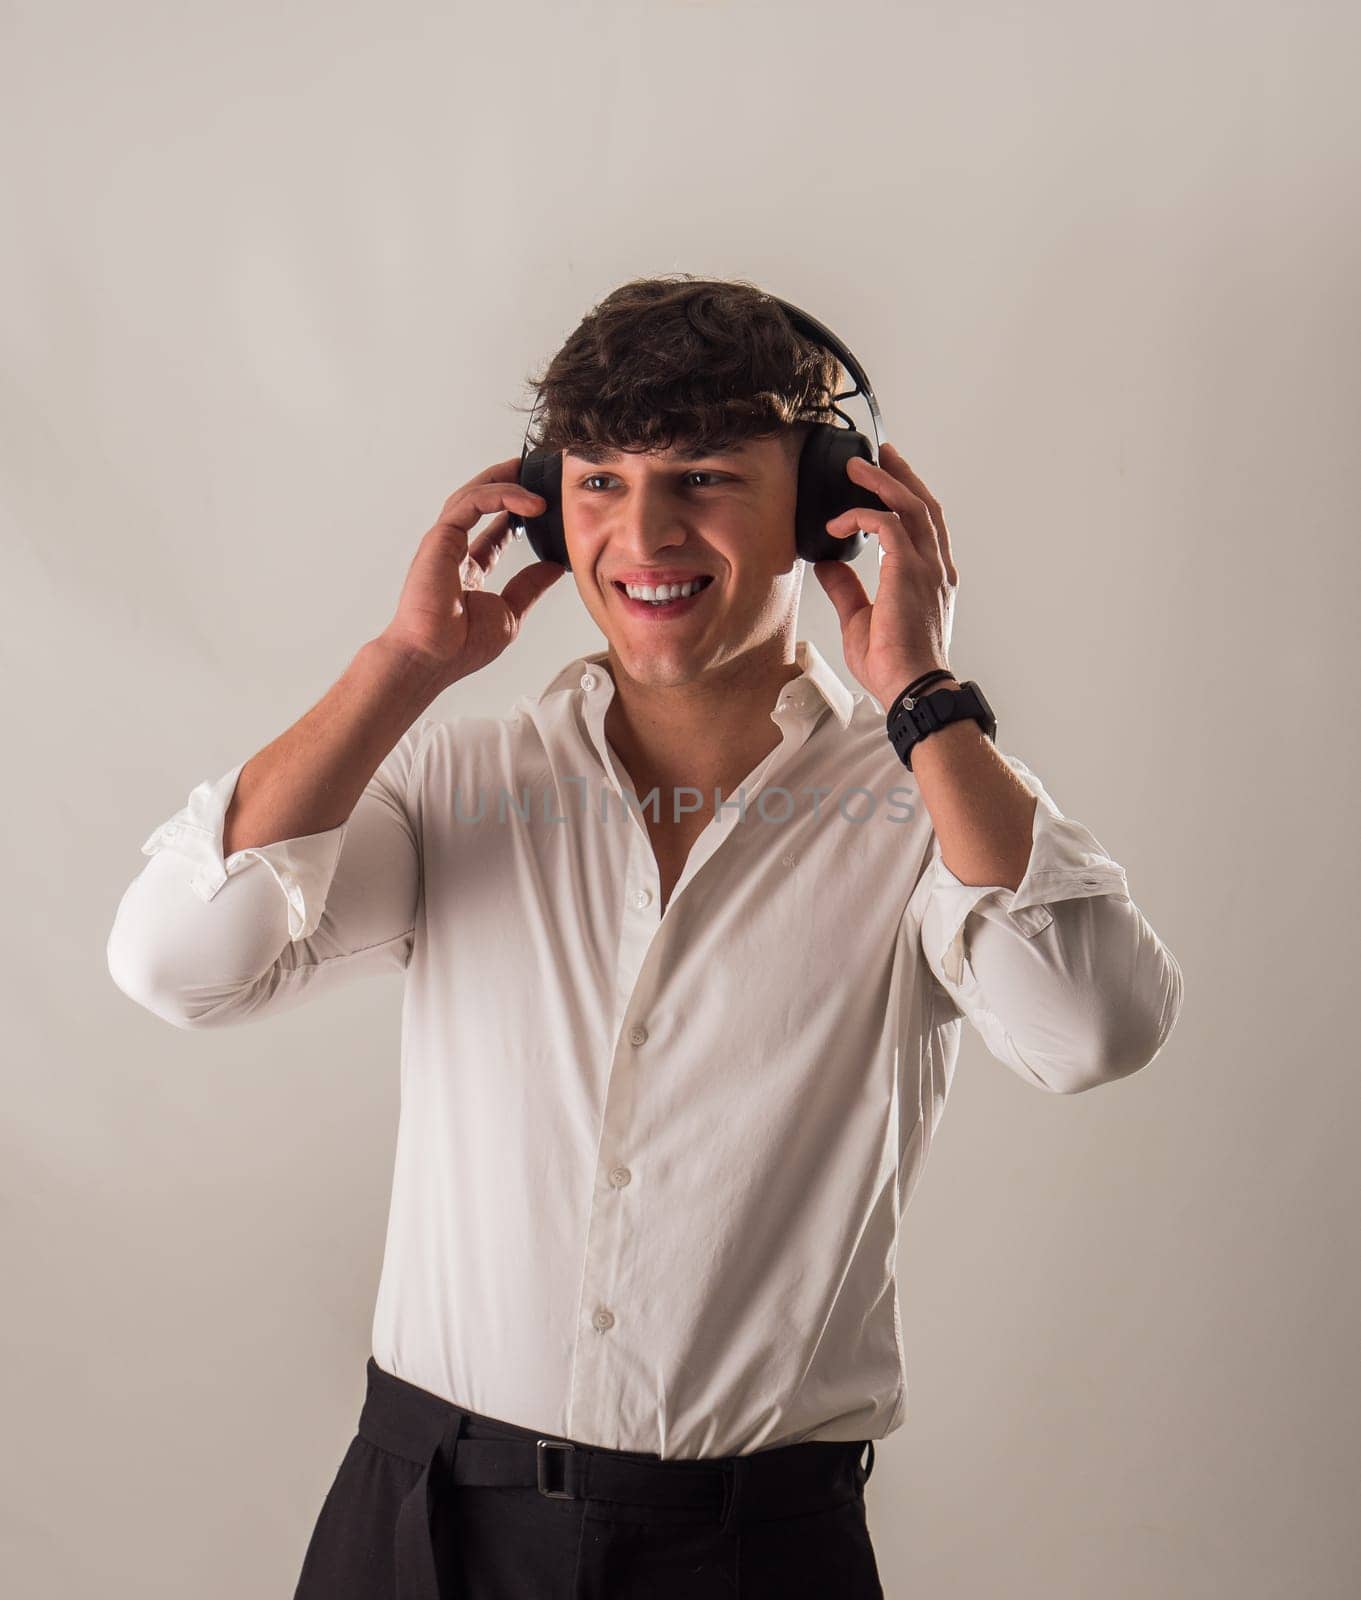 A young man is listening to music on headphones by artofphoto